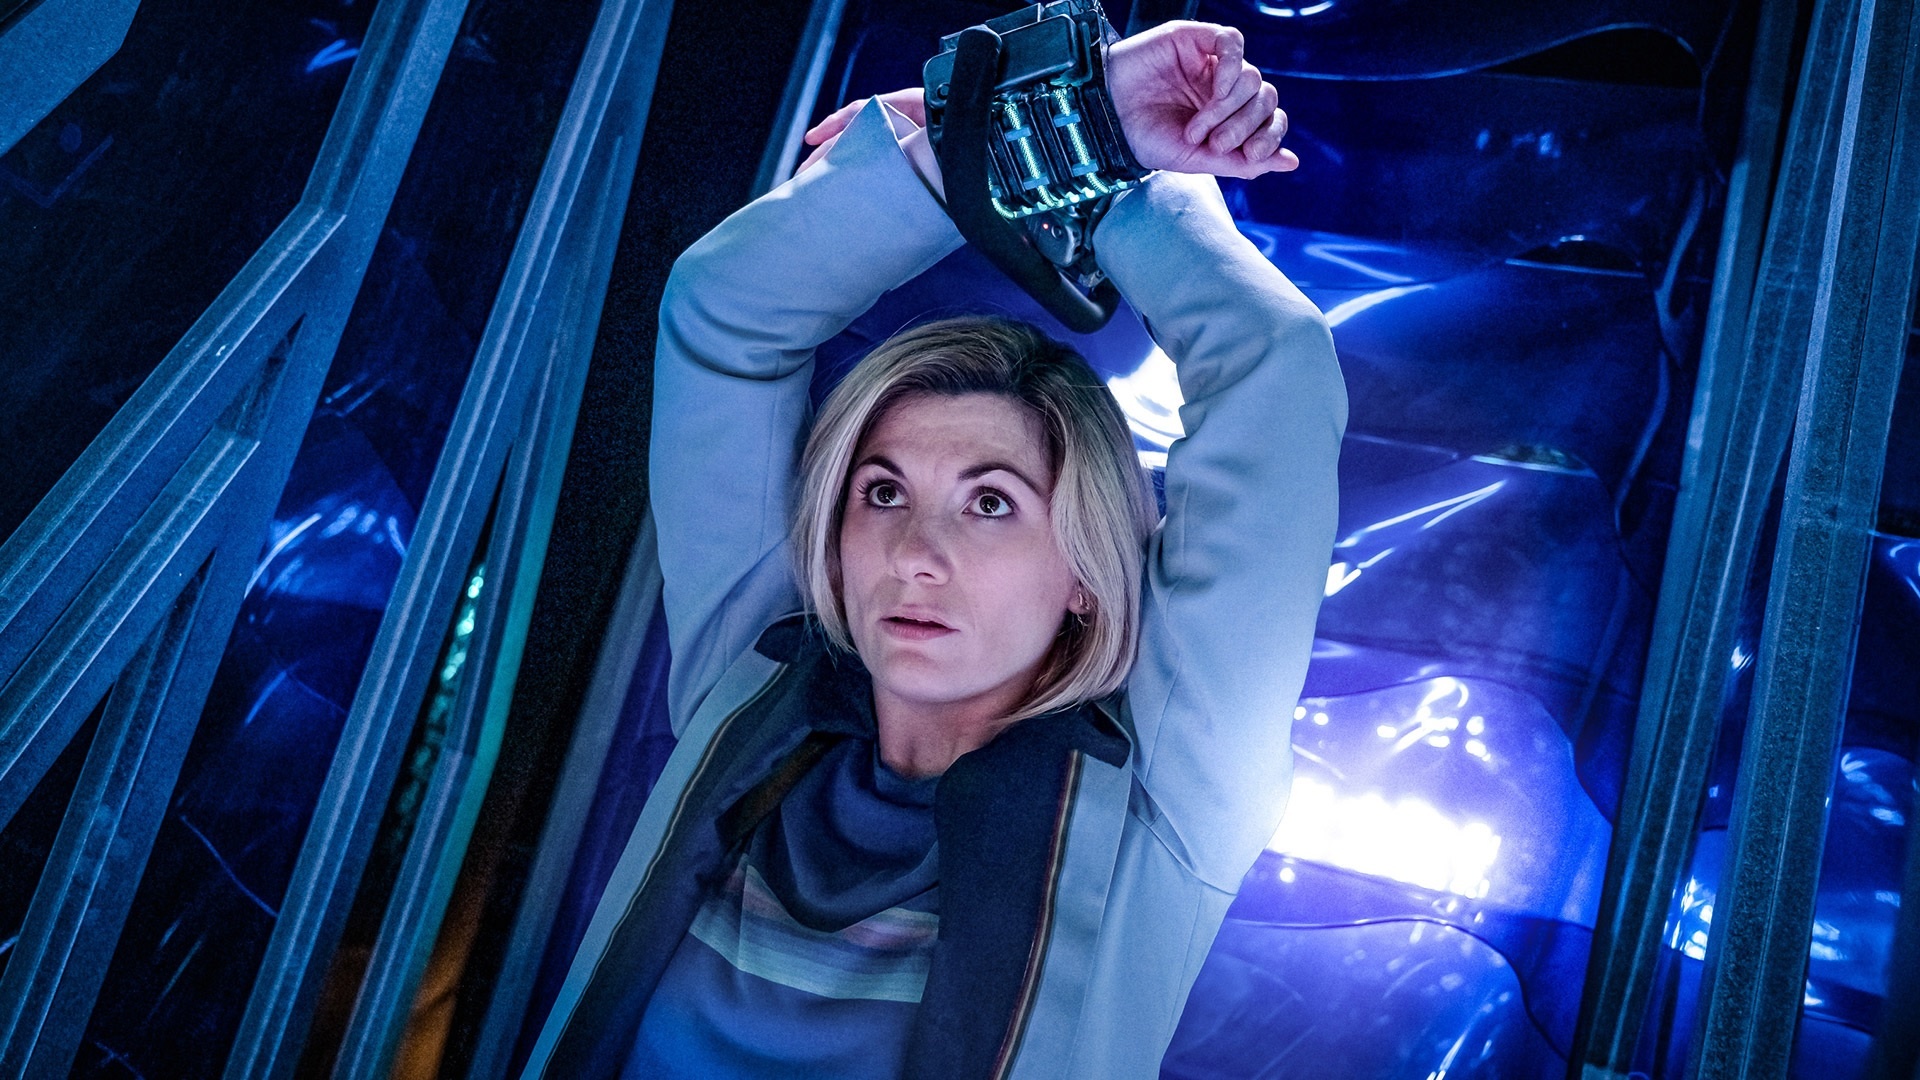 Chris Chibnall, Jodie Whittaker, Doctor Who series 14 15, The Doctor Who Companion, 1920x1080 Full HD Desktop